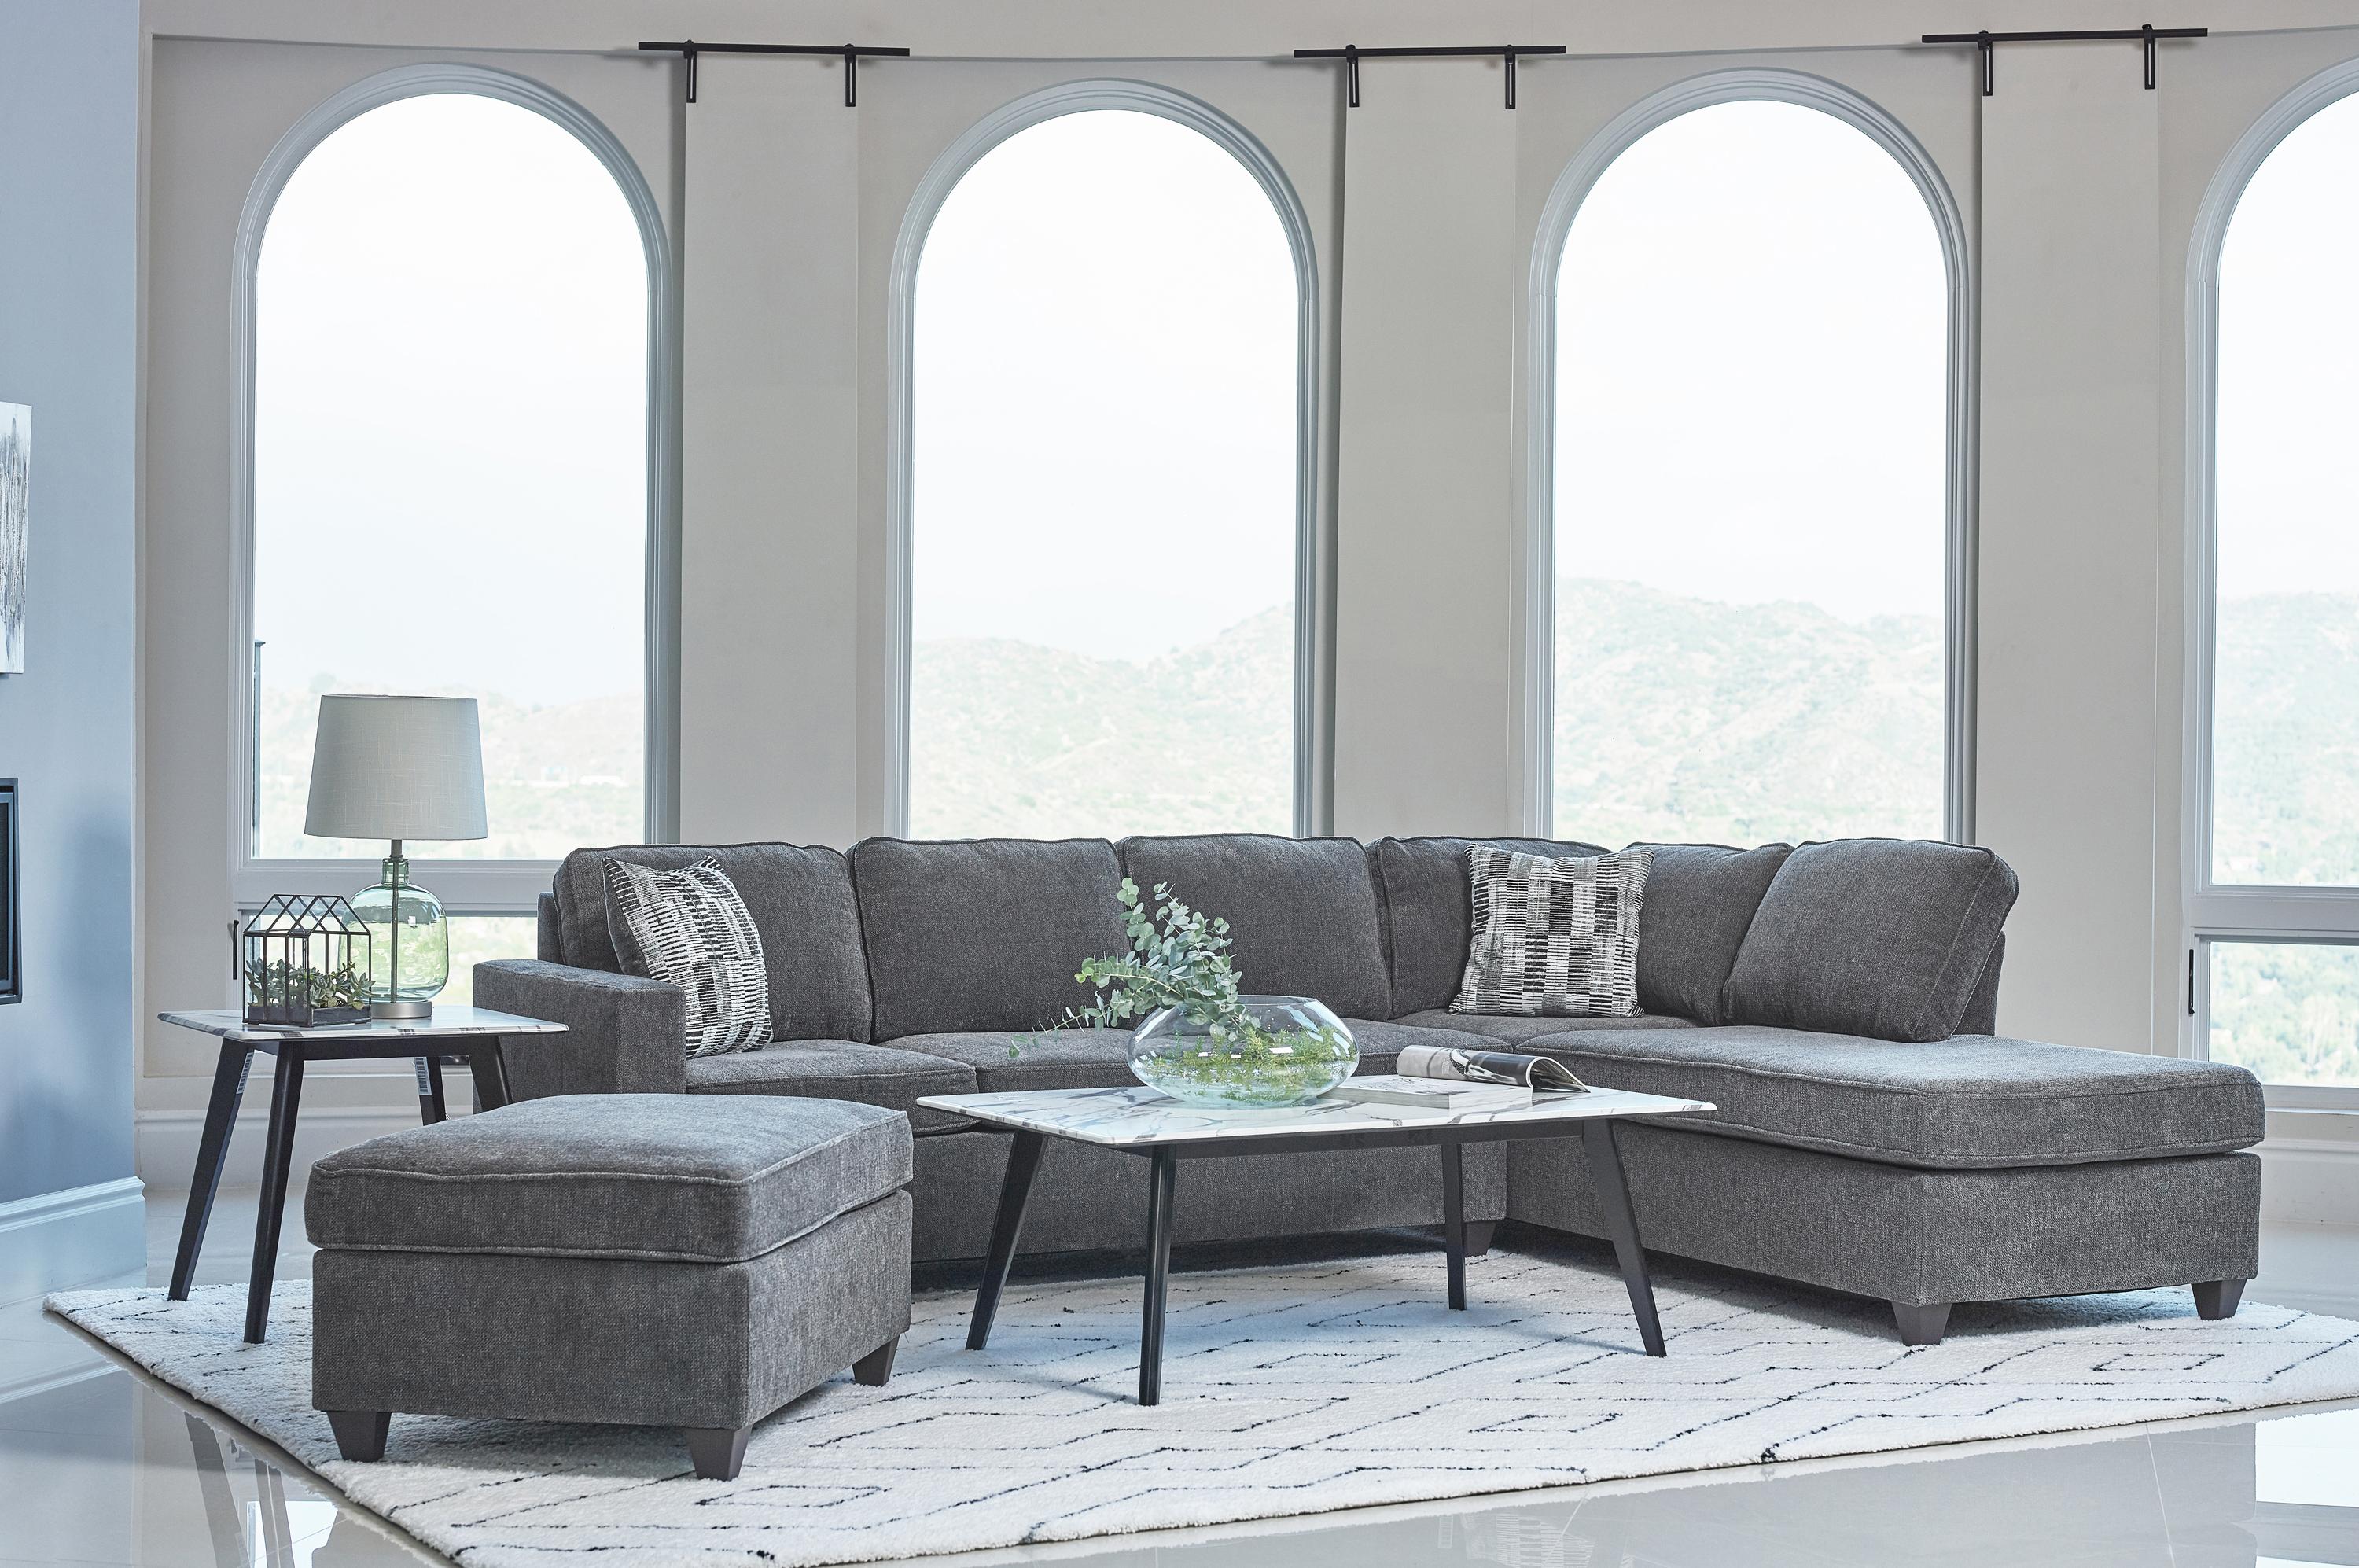 Transitional Sectional Set 509347-3S Mccord 509347-3S in Dark Gray Chenille